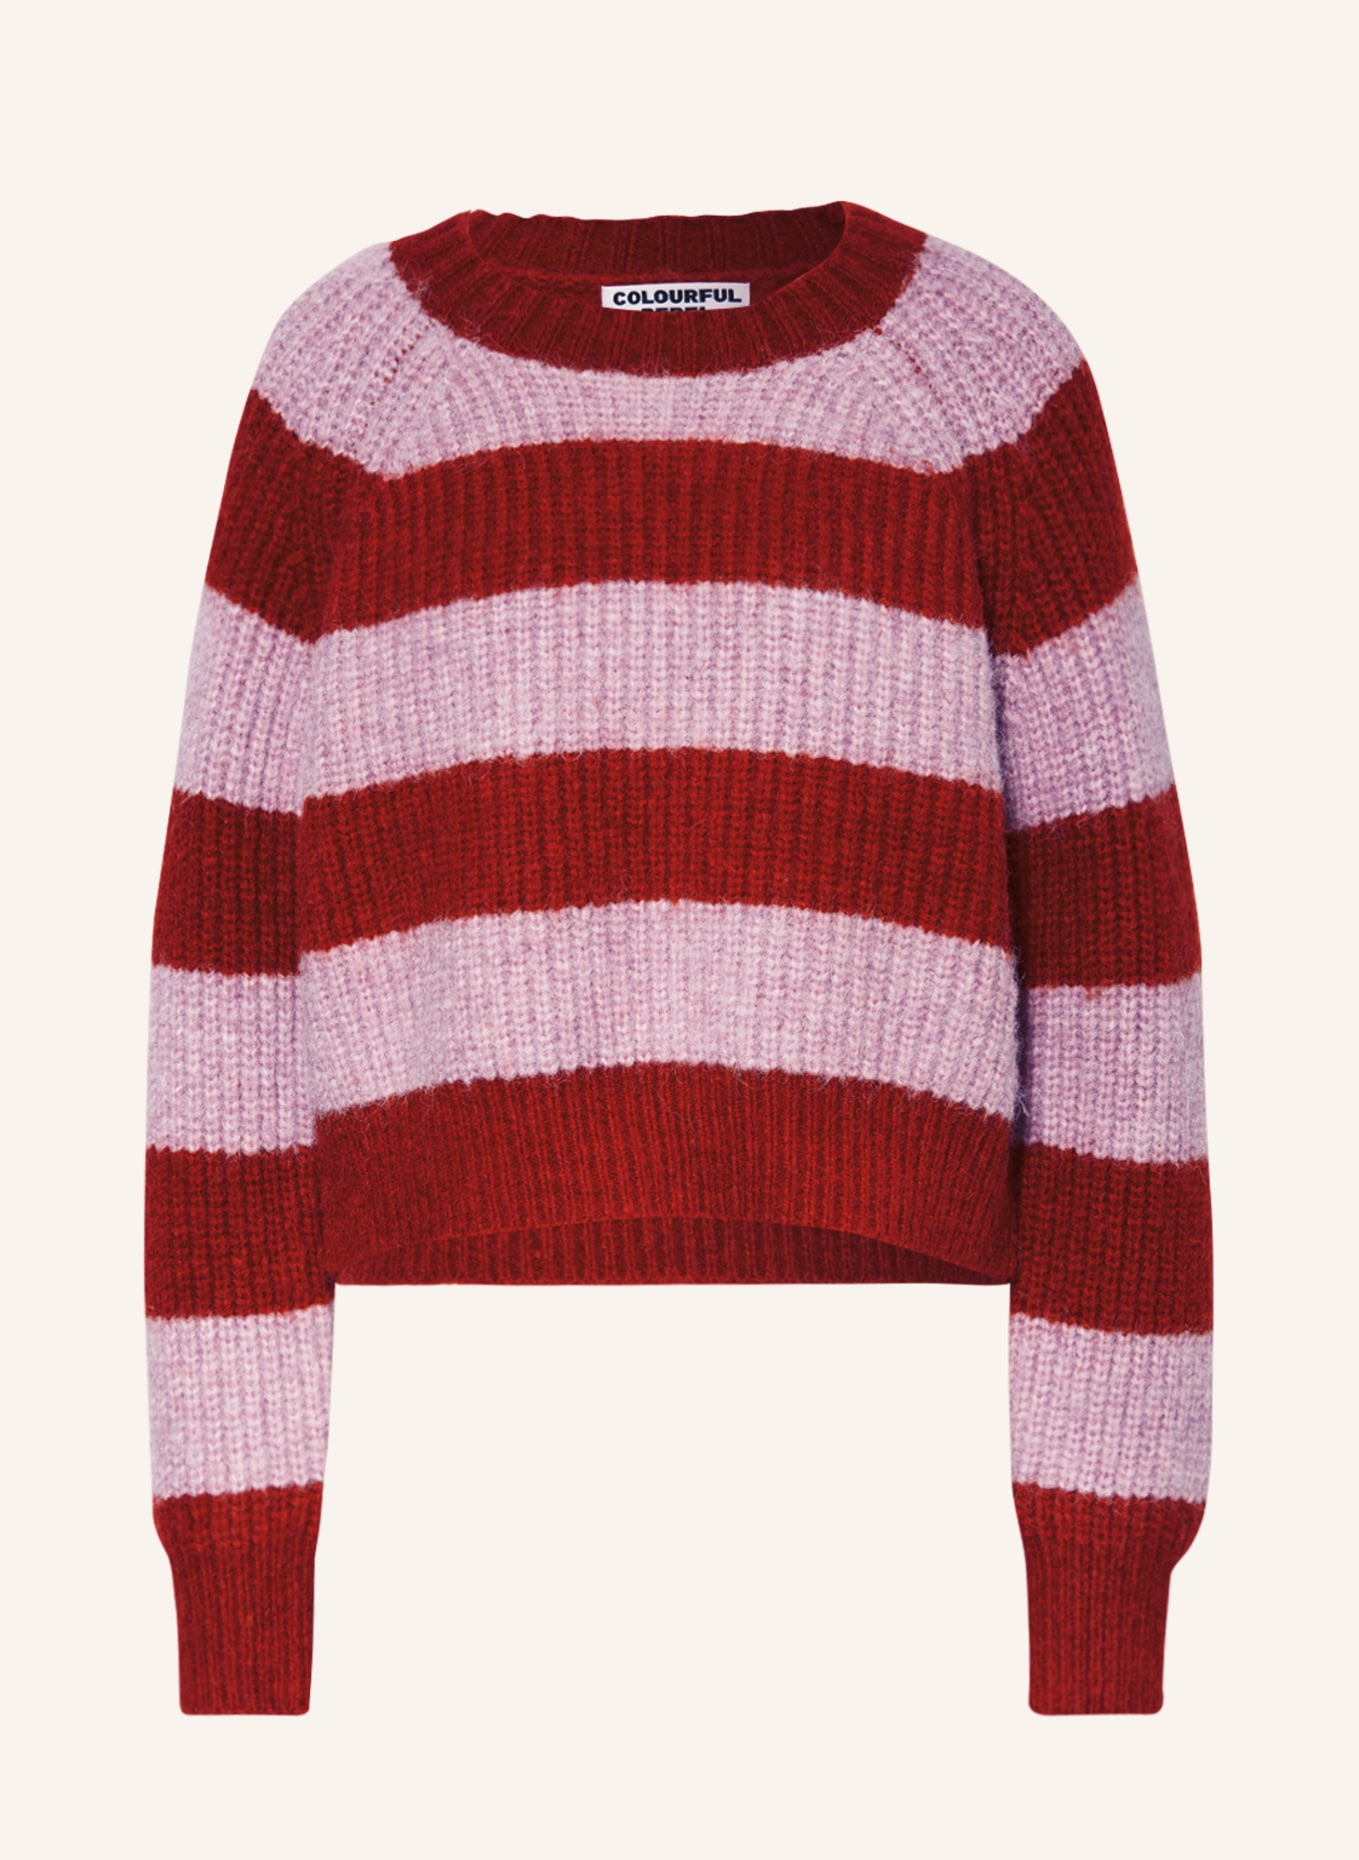 COLOURFUL REBEL Sweater, Color: DARK RED/ PINK (Image 1)